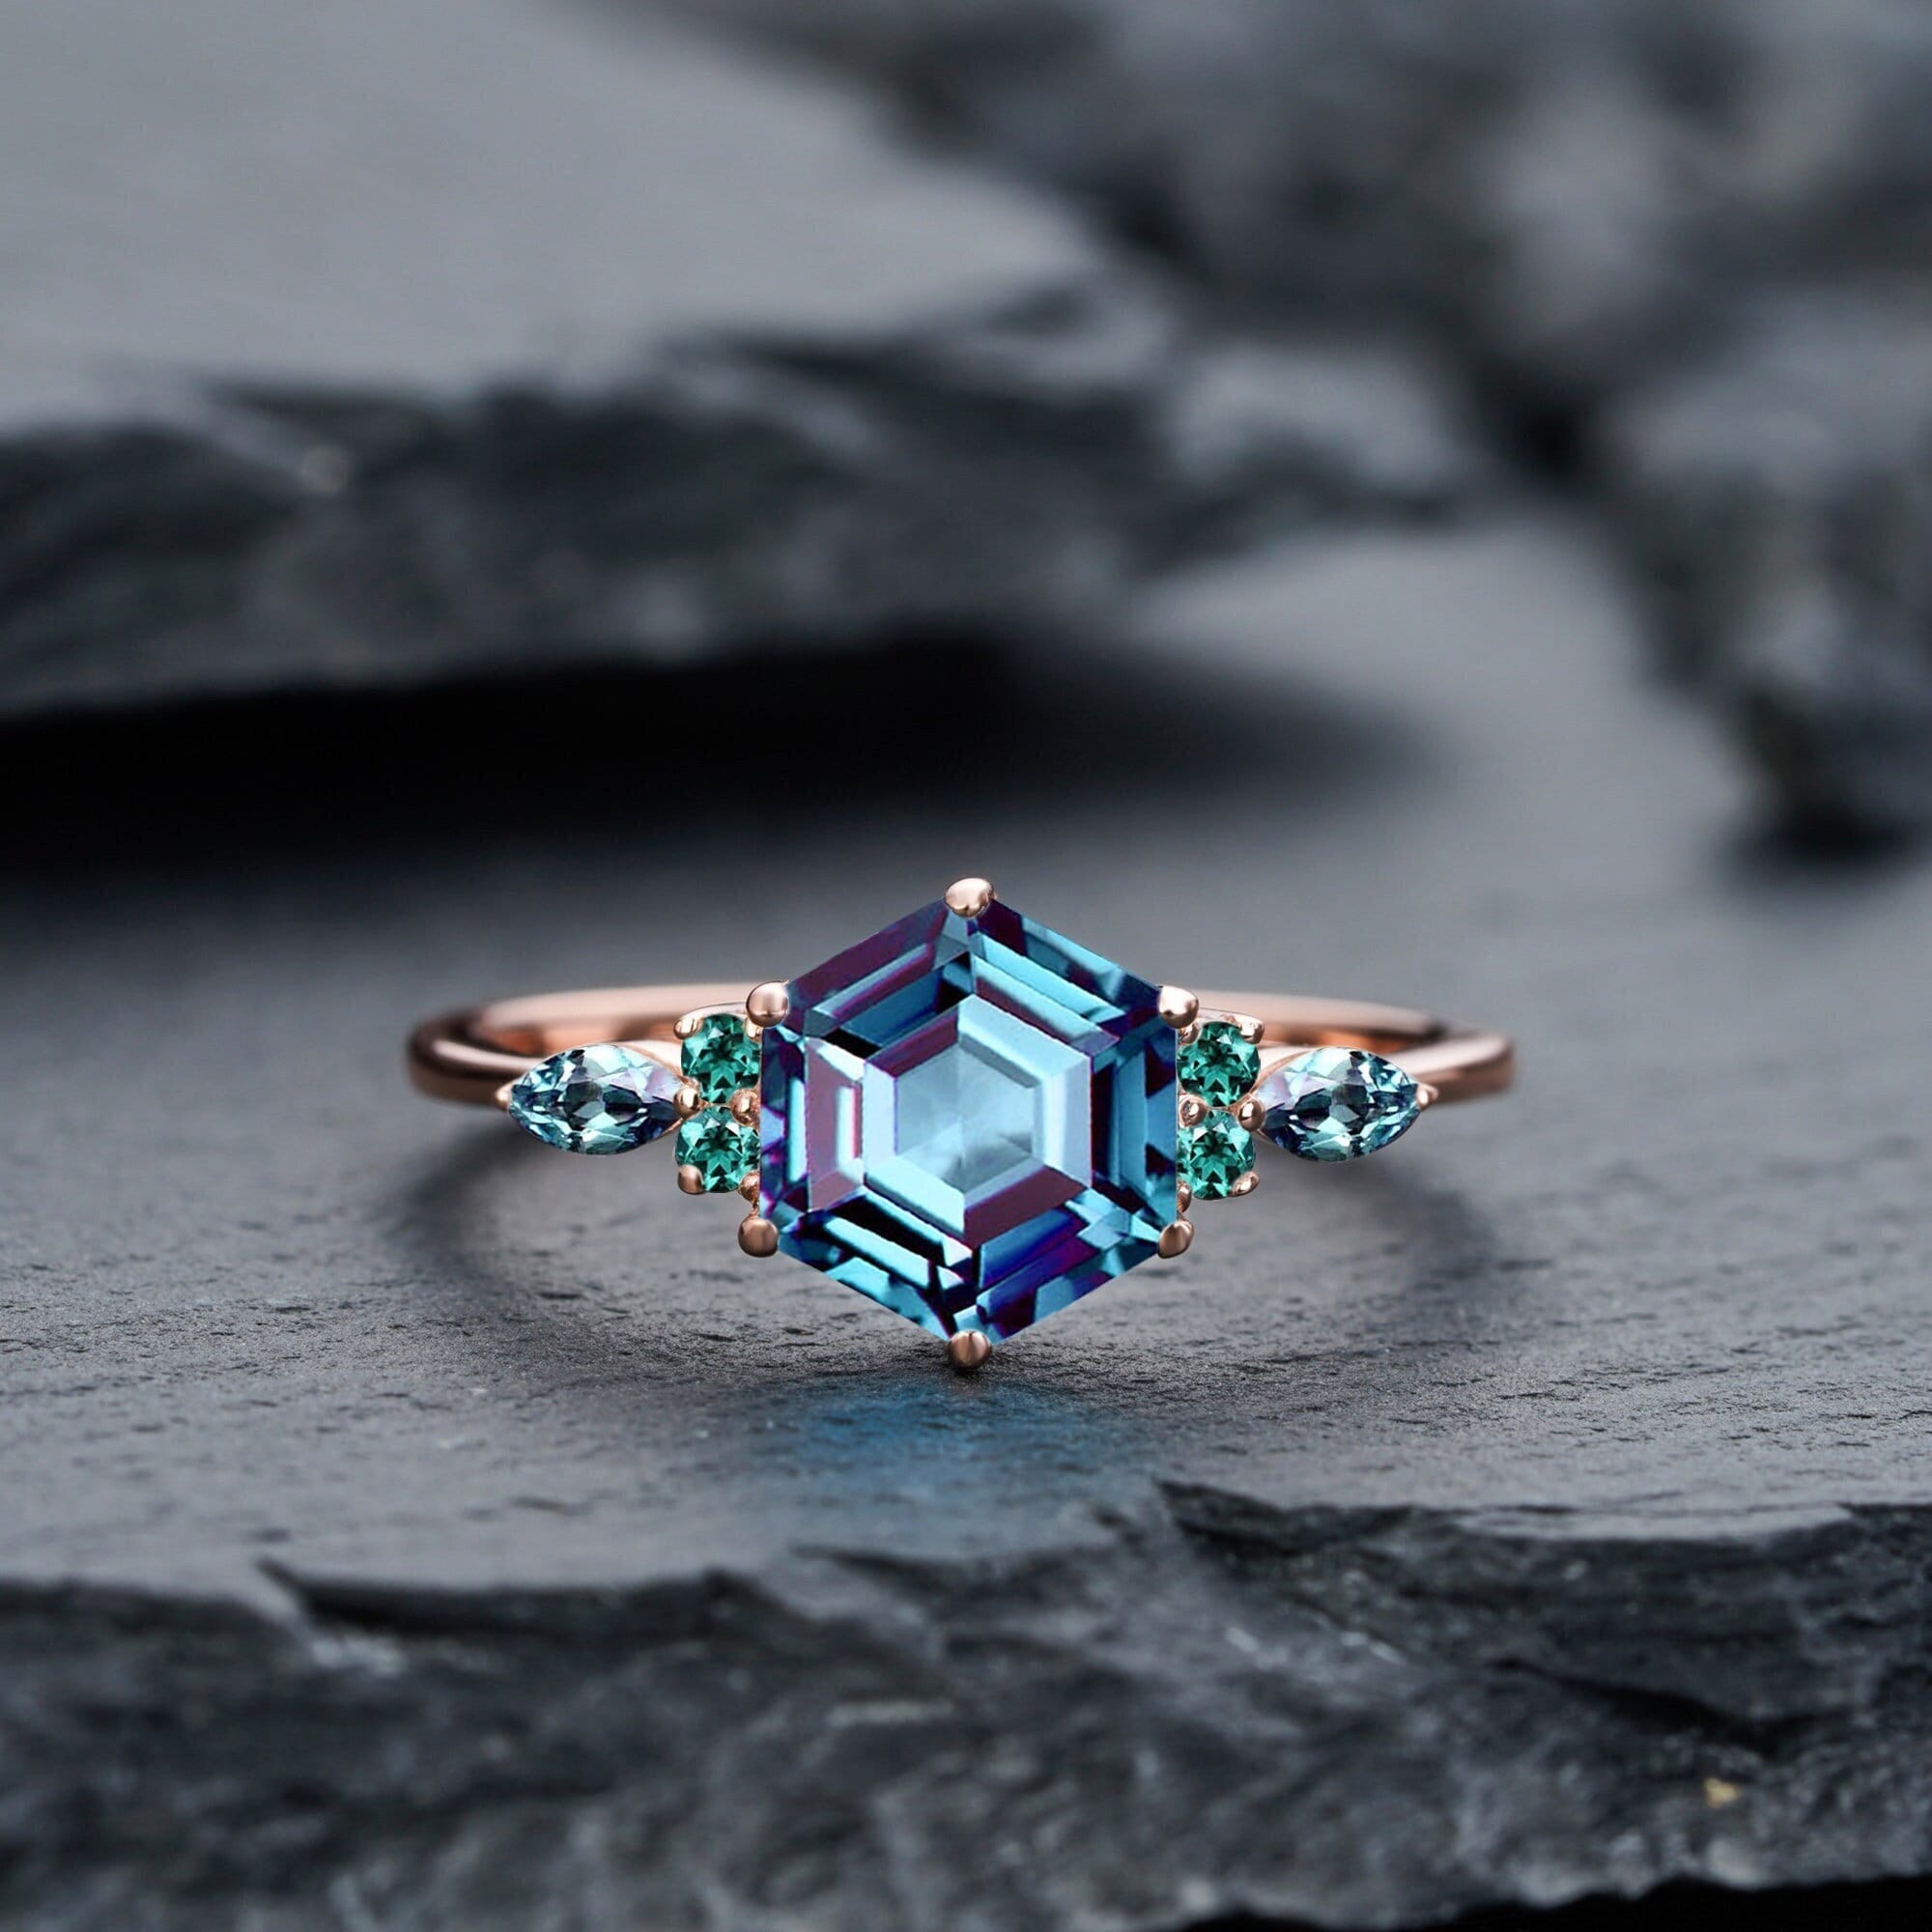 Montana Sapphire Rings - Poetry of Luxe Jewelry